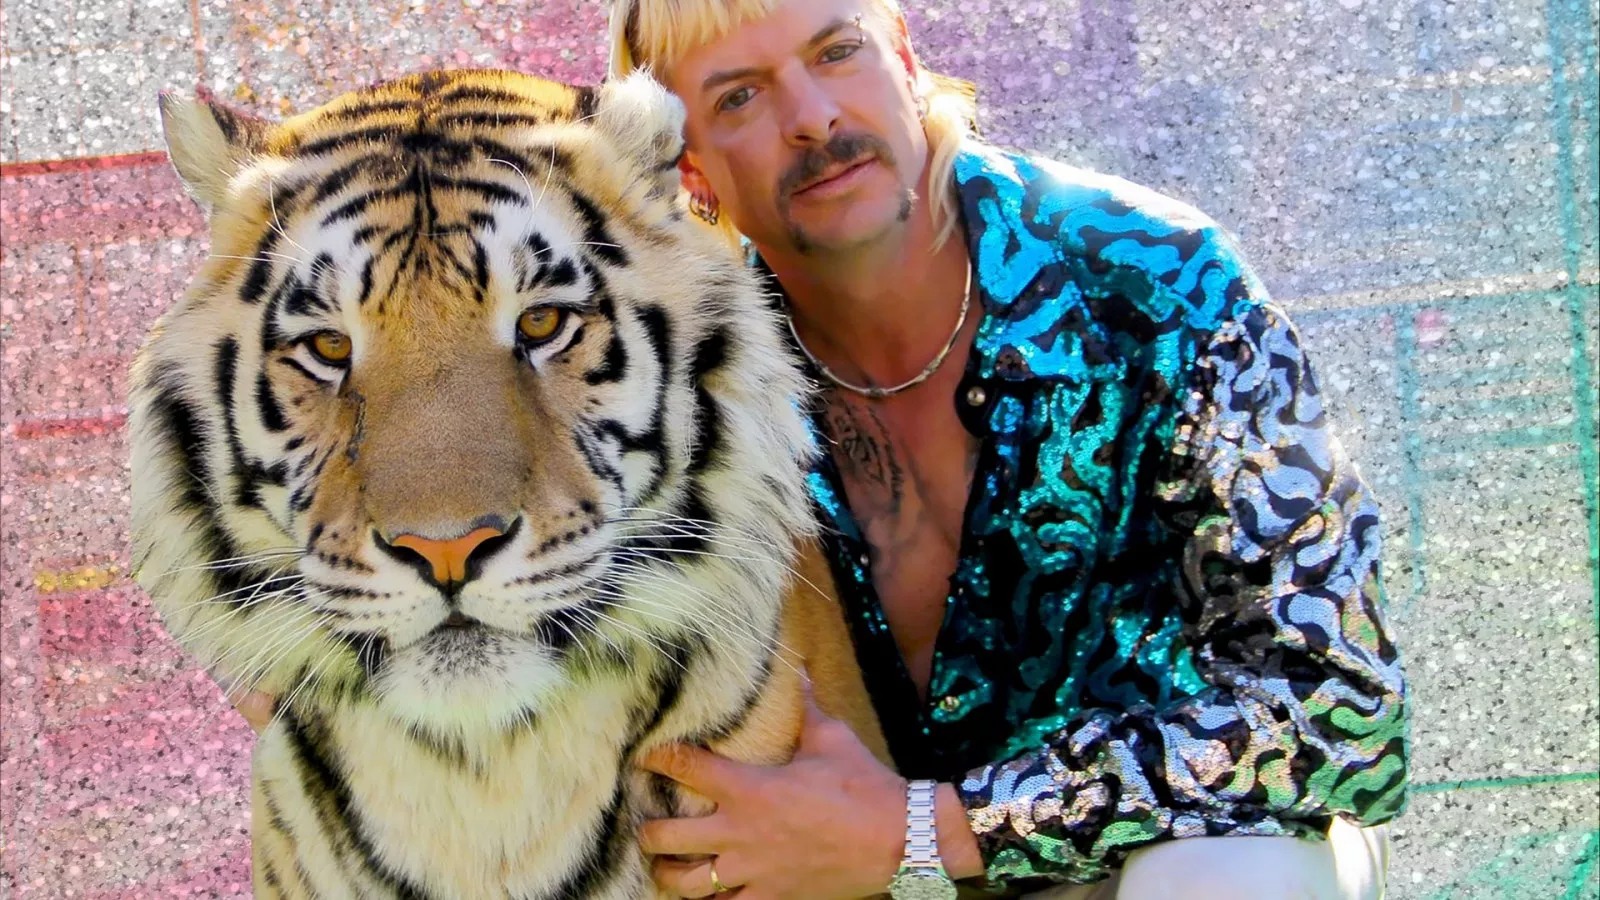 Where Are Joe Exotic's Tigers and Animals Now?